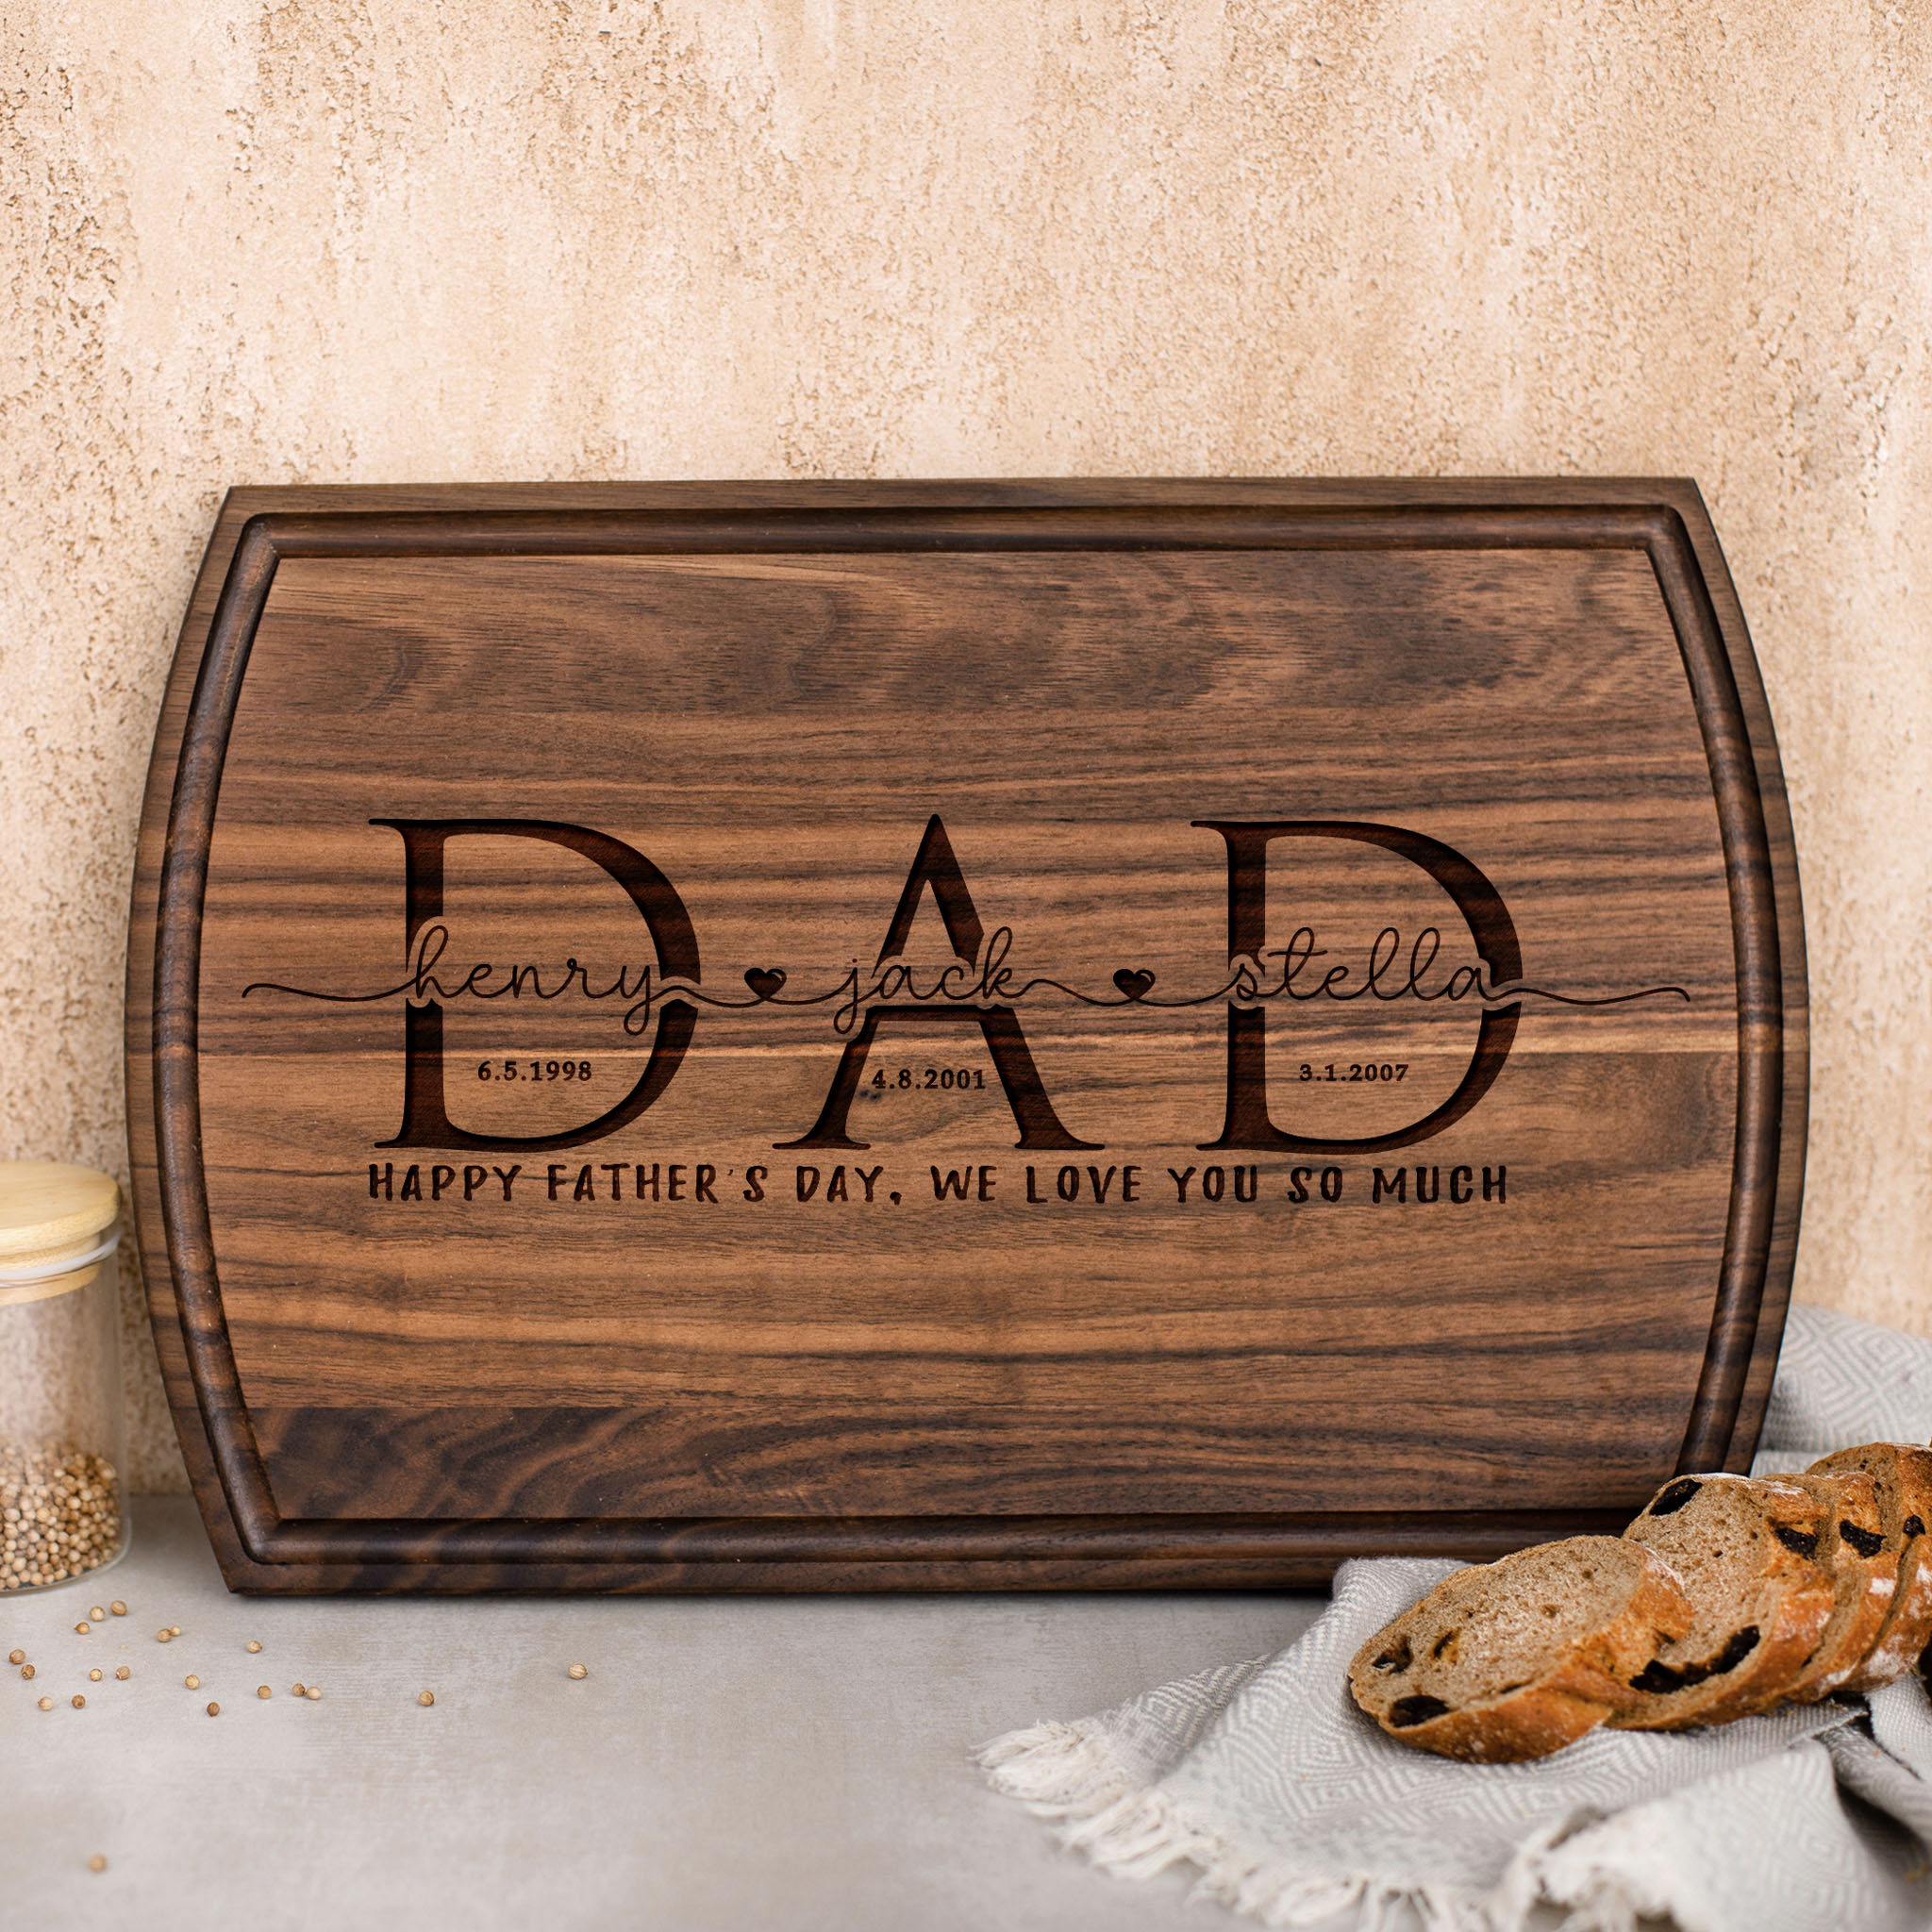 Personalized Wooden Engraved Square Coasters